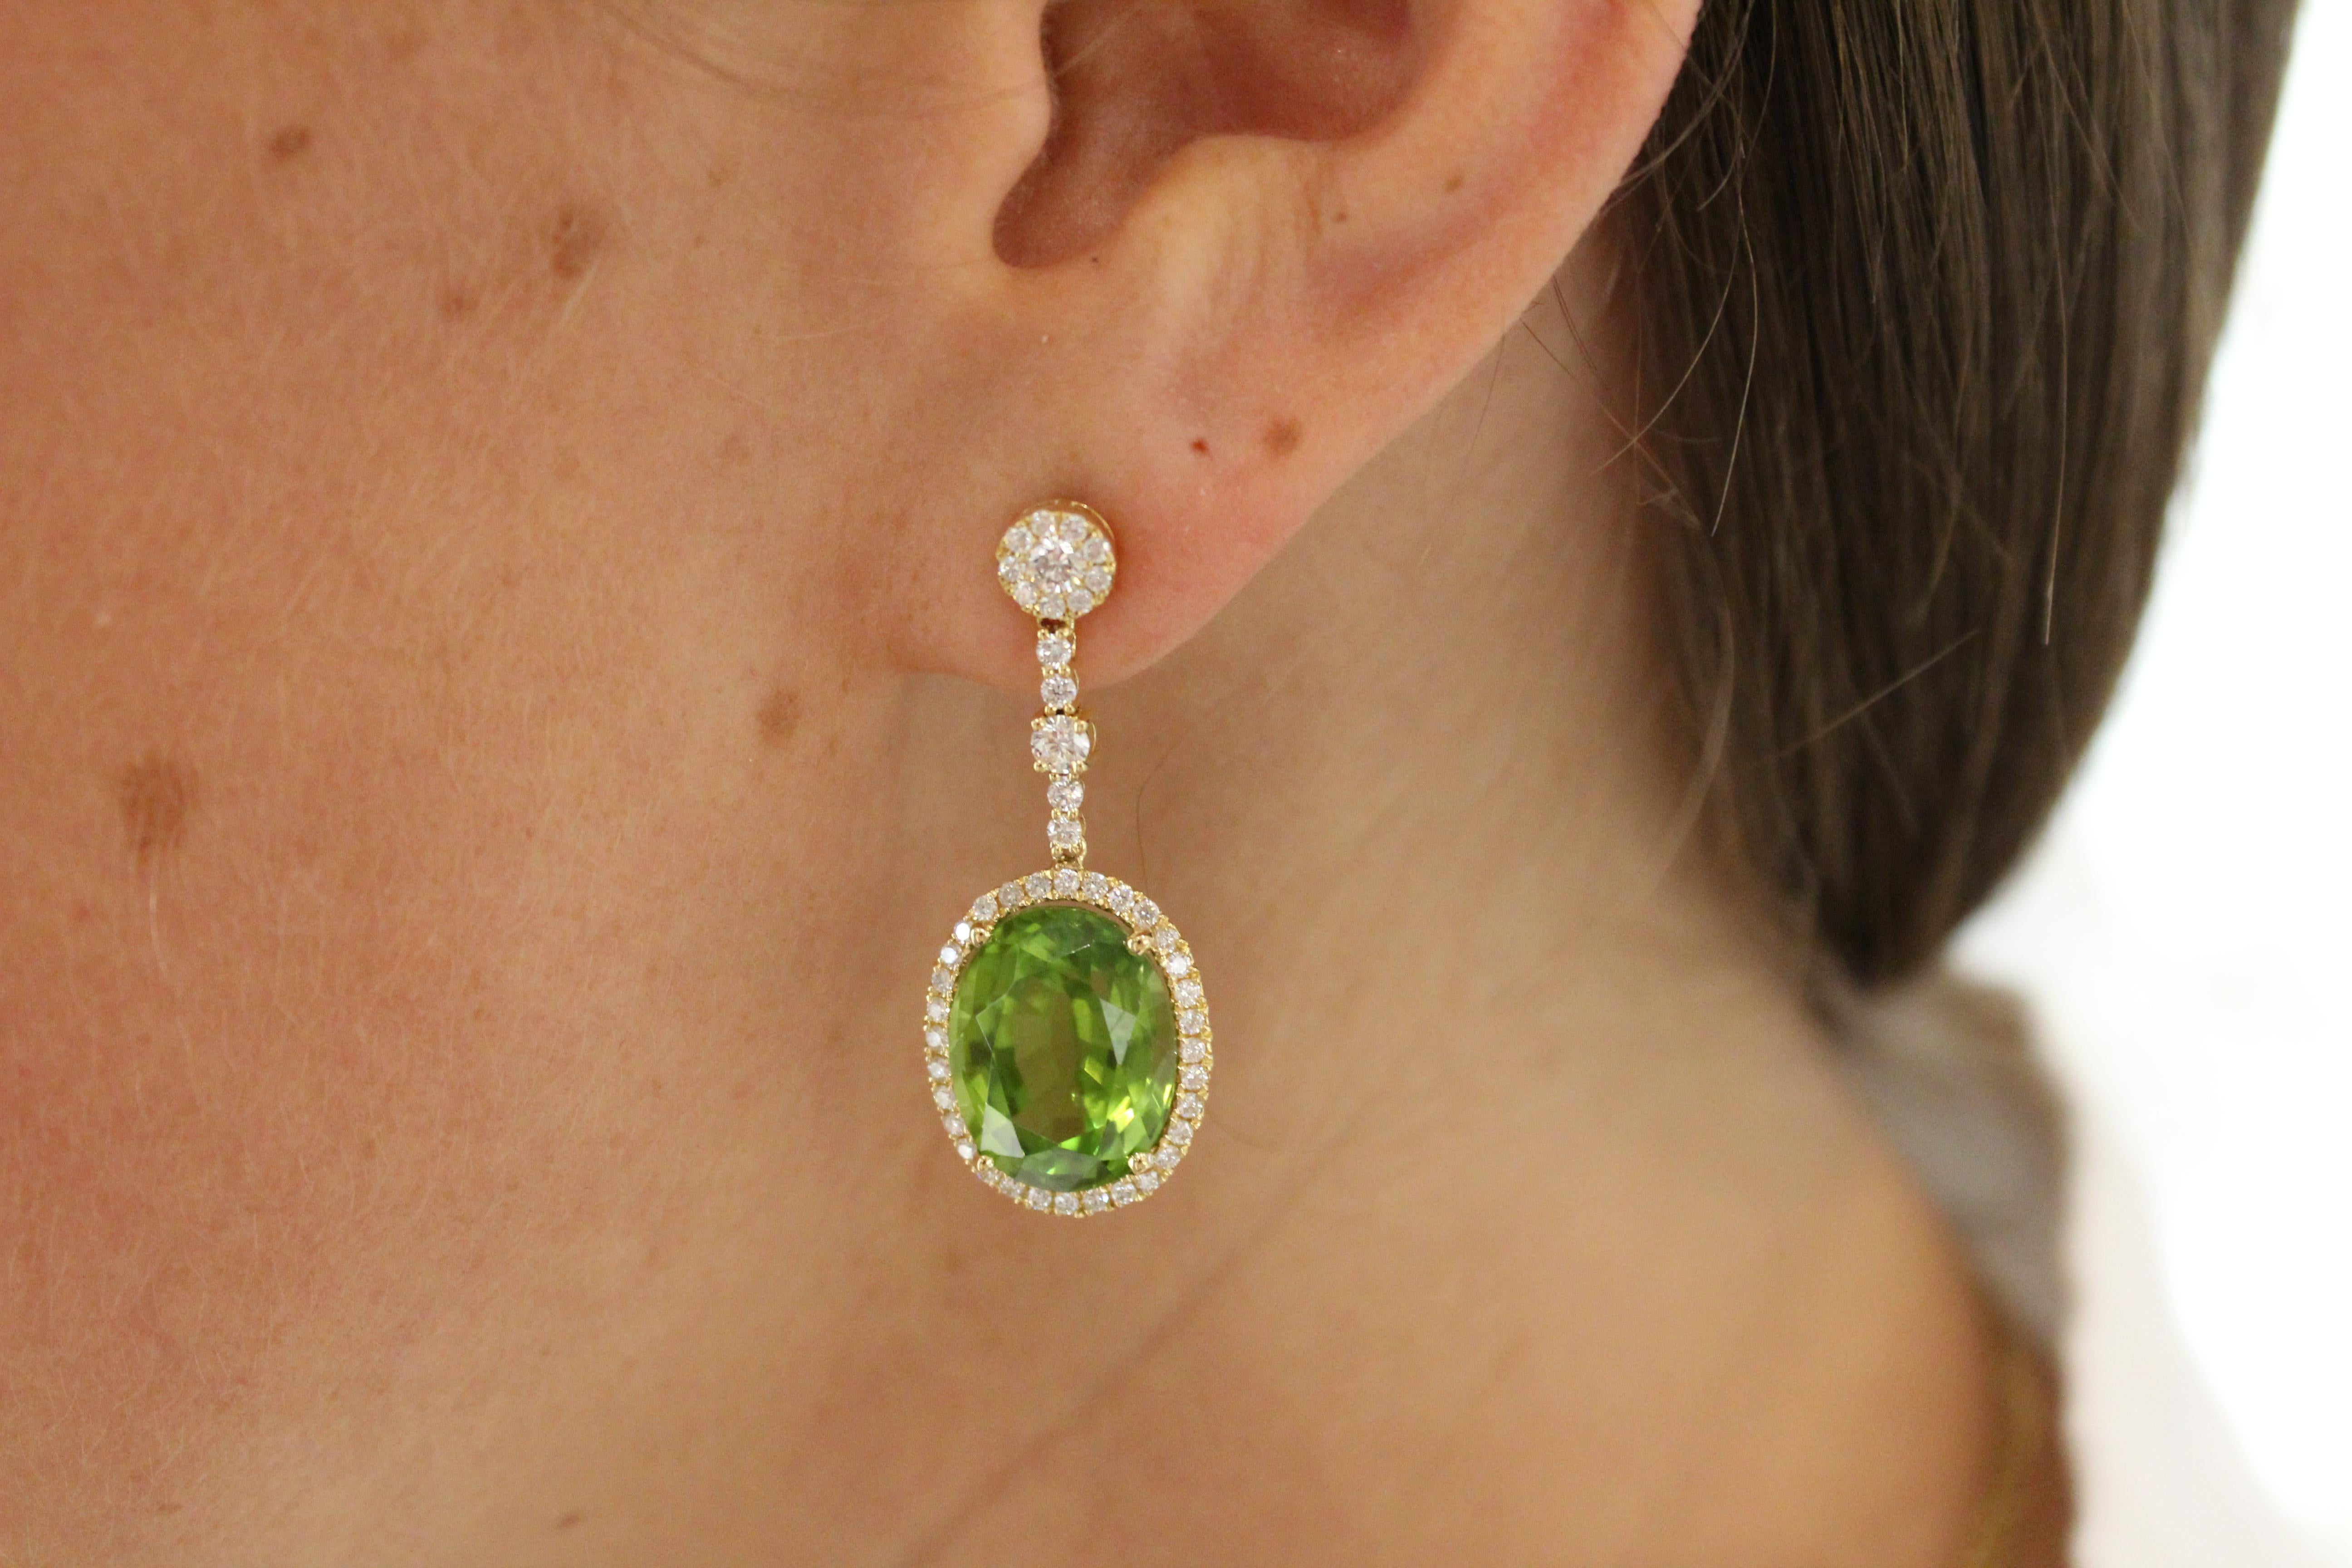 Each earring features a Diamond (1.12cts) stud, with a sparkling Diamond post below. Diamonds then halo a stunning central Peridot (17.89) stone to create a stunning pair of earrings.

Peridot is a universal stone that looks incredible on every